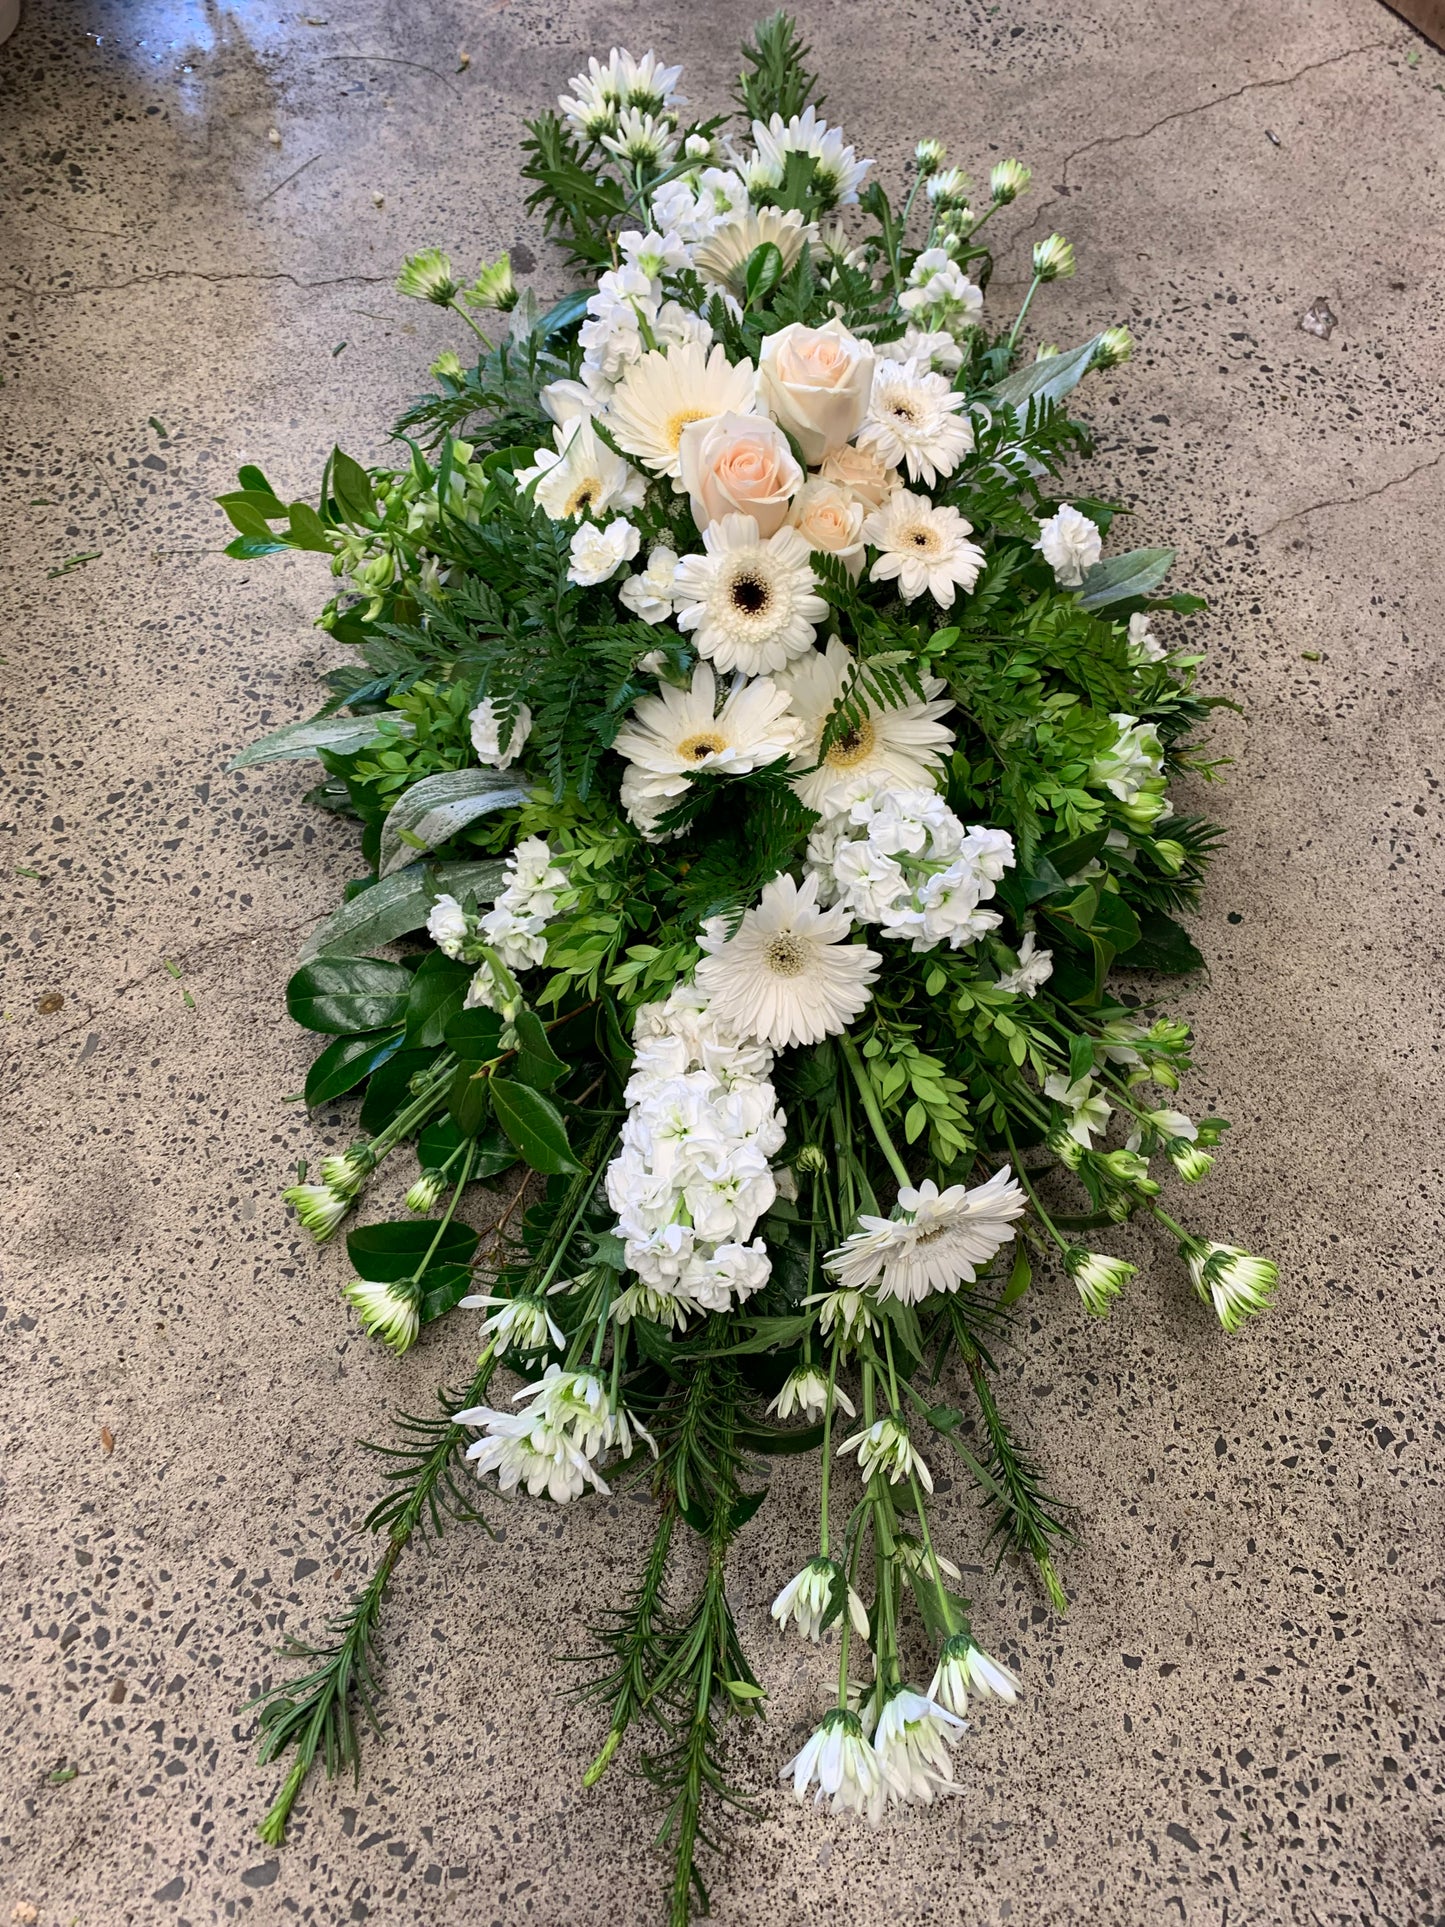 White and Green Funeral Casket